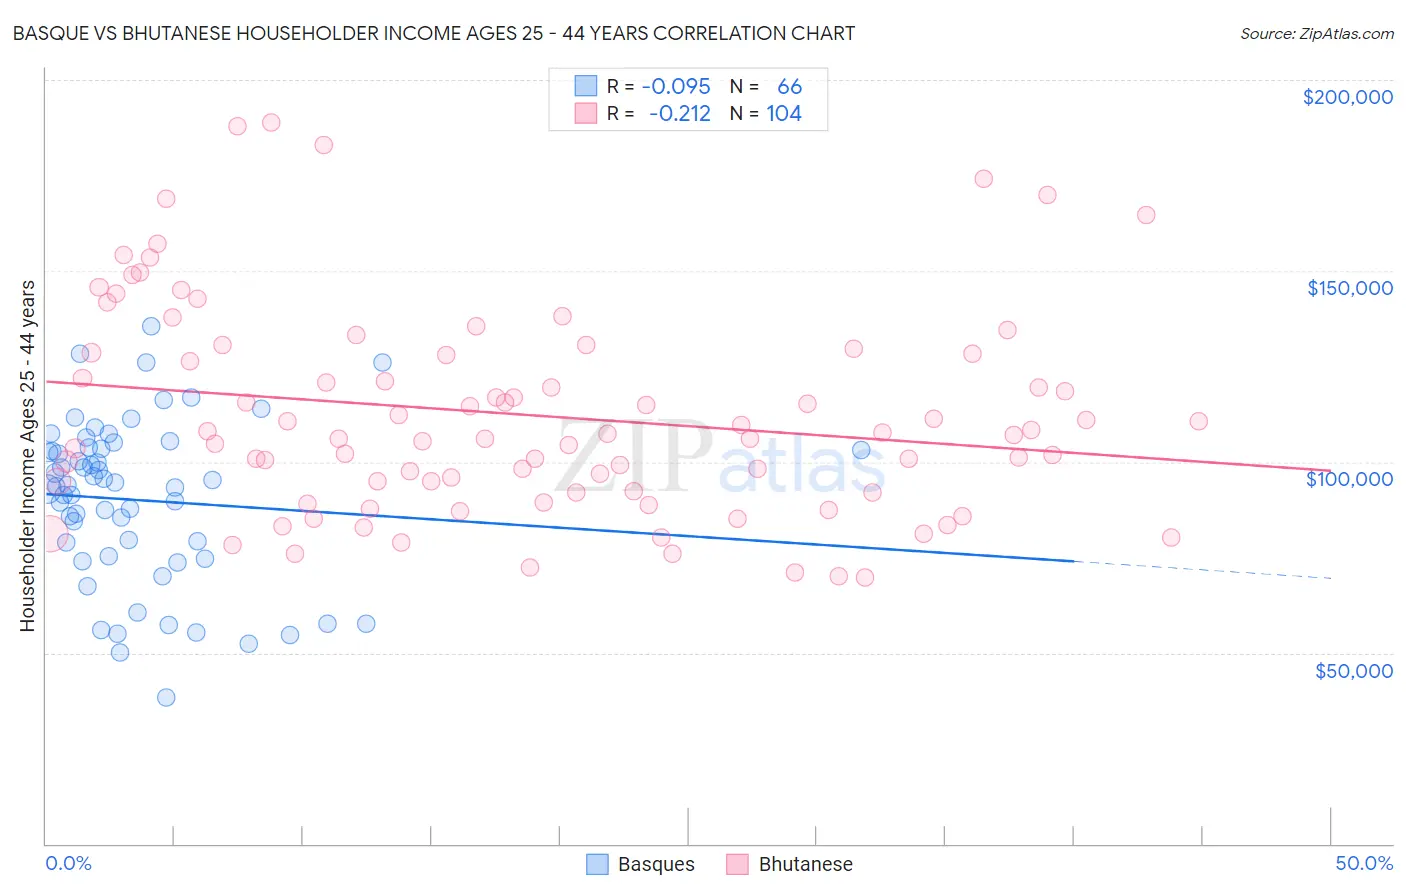 Basque vs Bhutanese Householder Income Ages 25 - 44 years